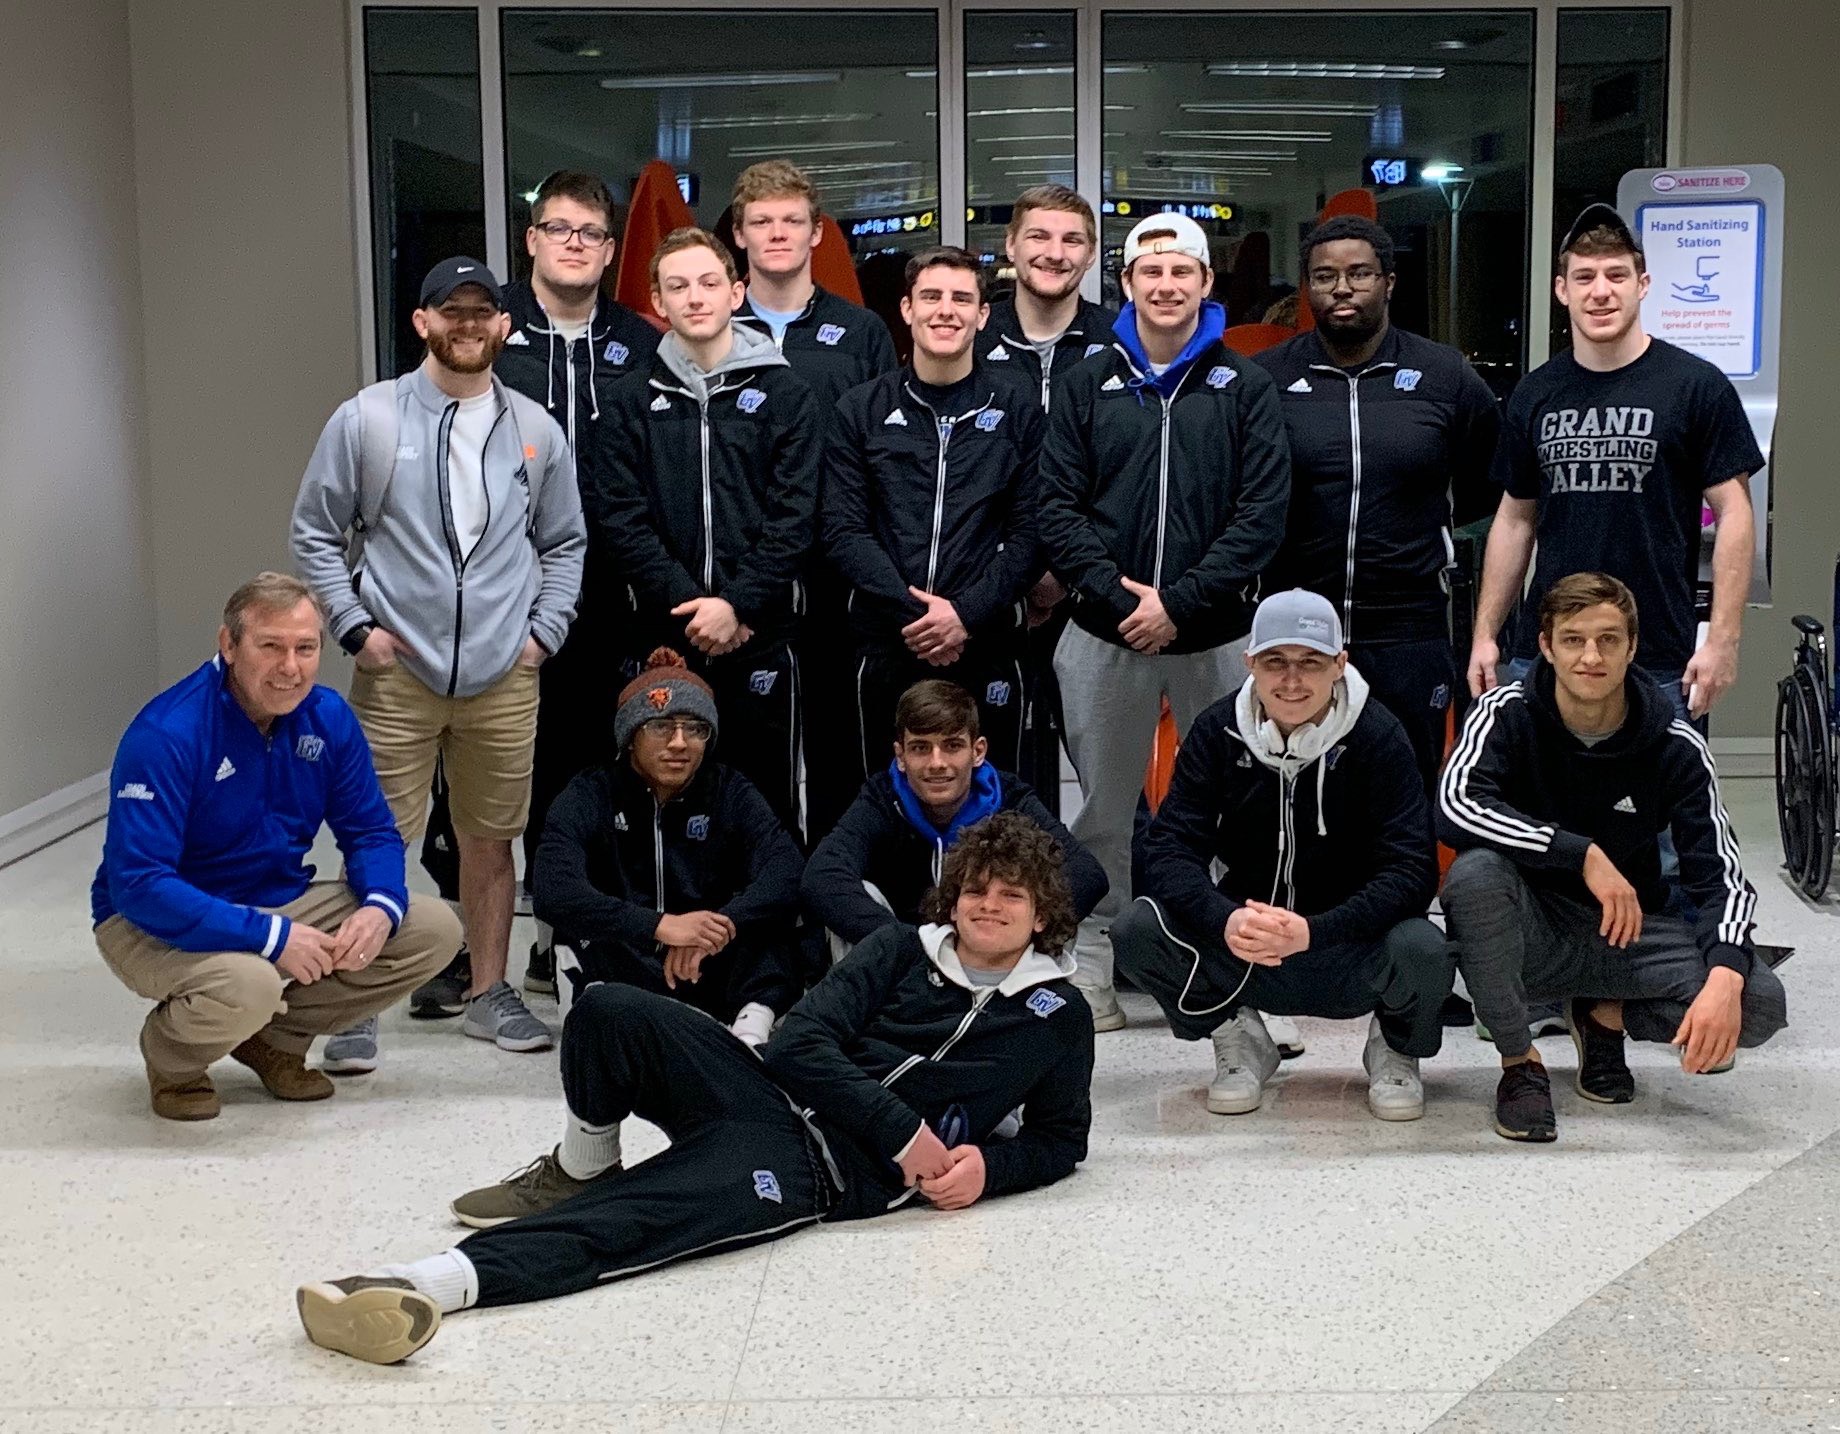 Wrestlers pose before boarding a plane to head to Dallas, Texas for National Championship tournament.